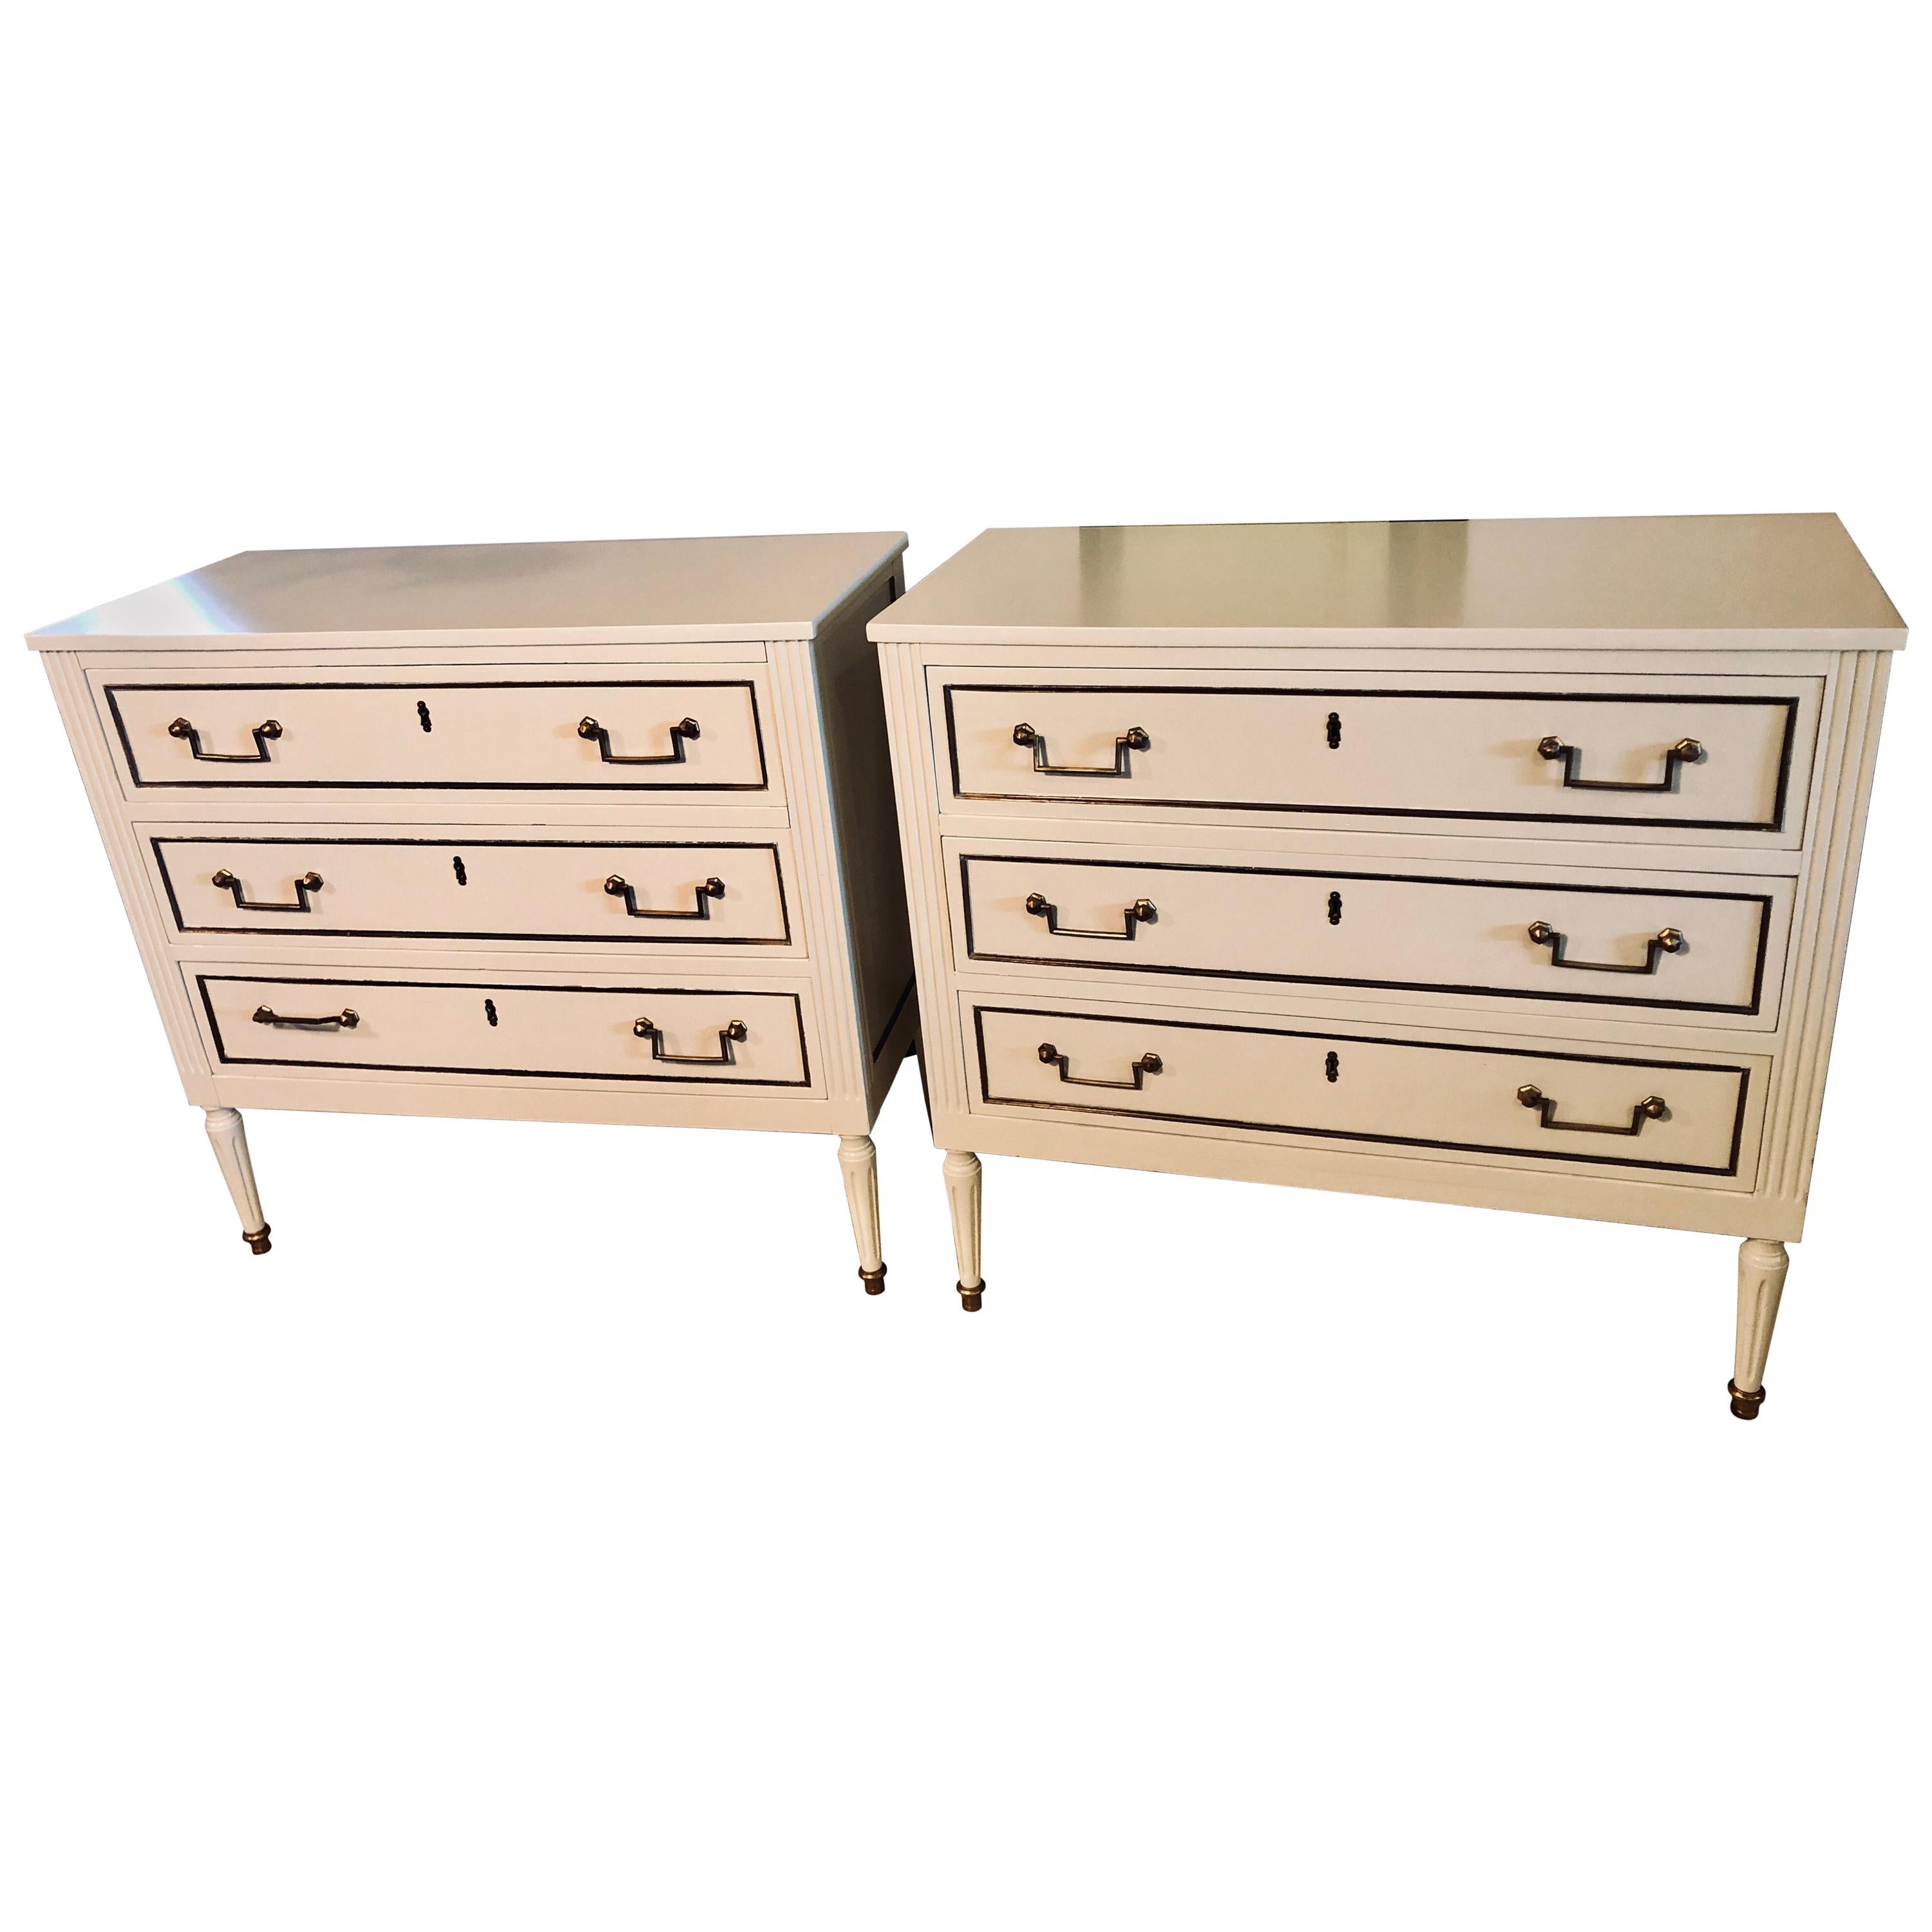 Pair of Stamped Jansen Commodes or Nightstands Chests in Louis XVI Style